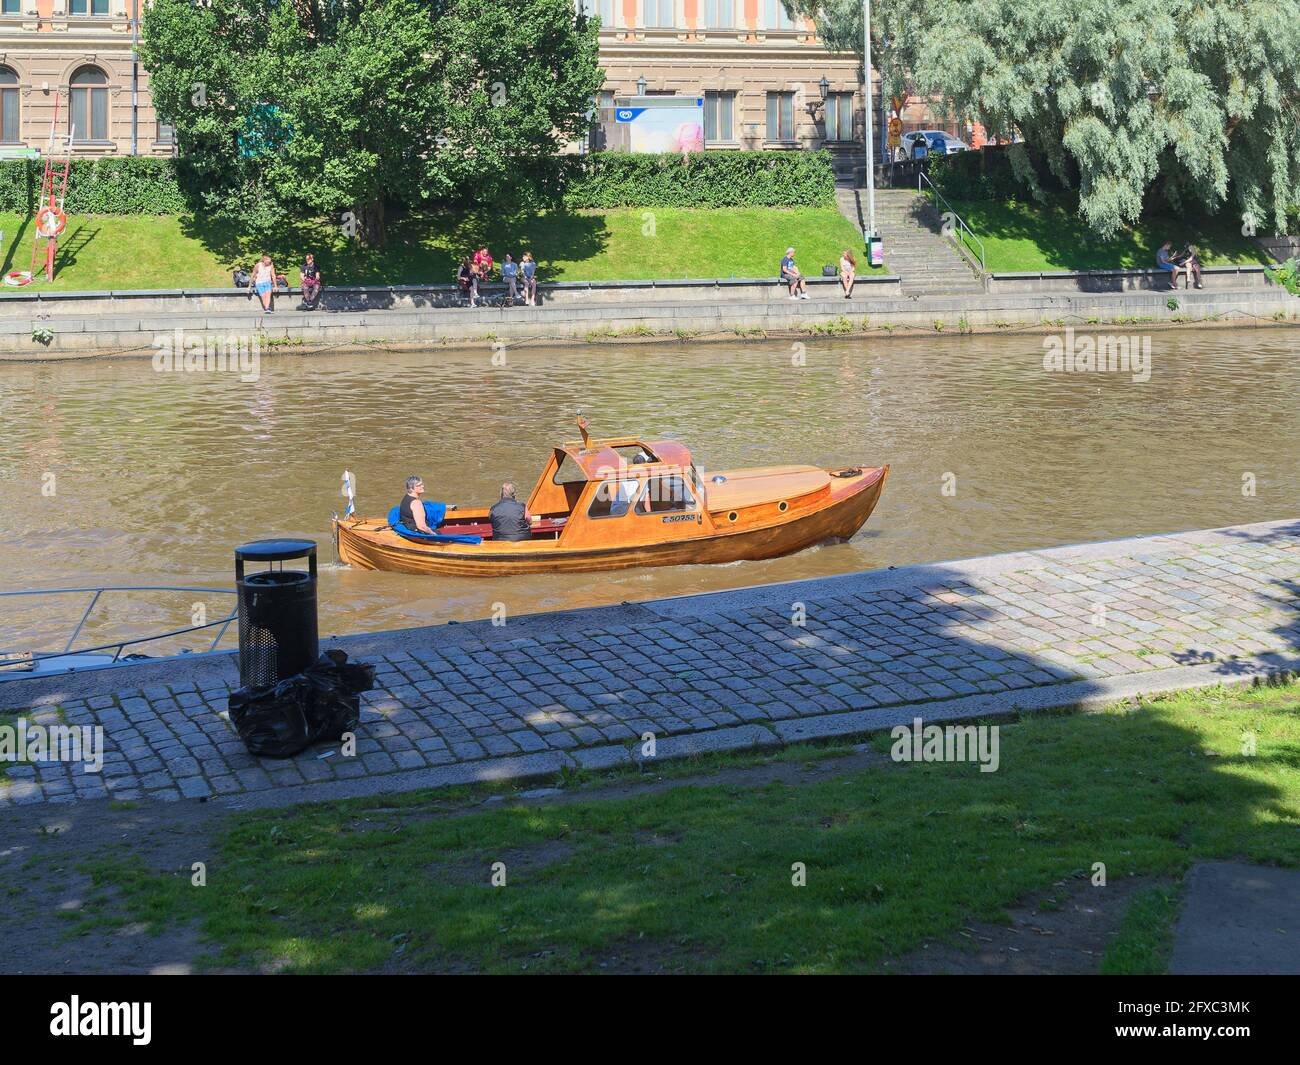 People enjoy a sunny summer day on the bank of river Aura in Turku, Finland while a wooden boat sails upstream. Stock Photo